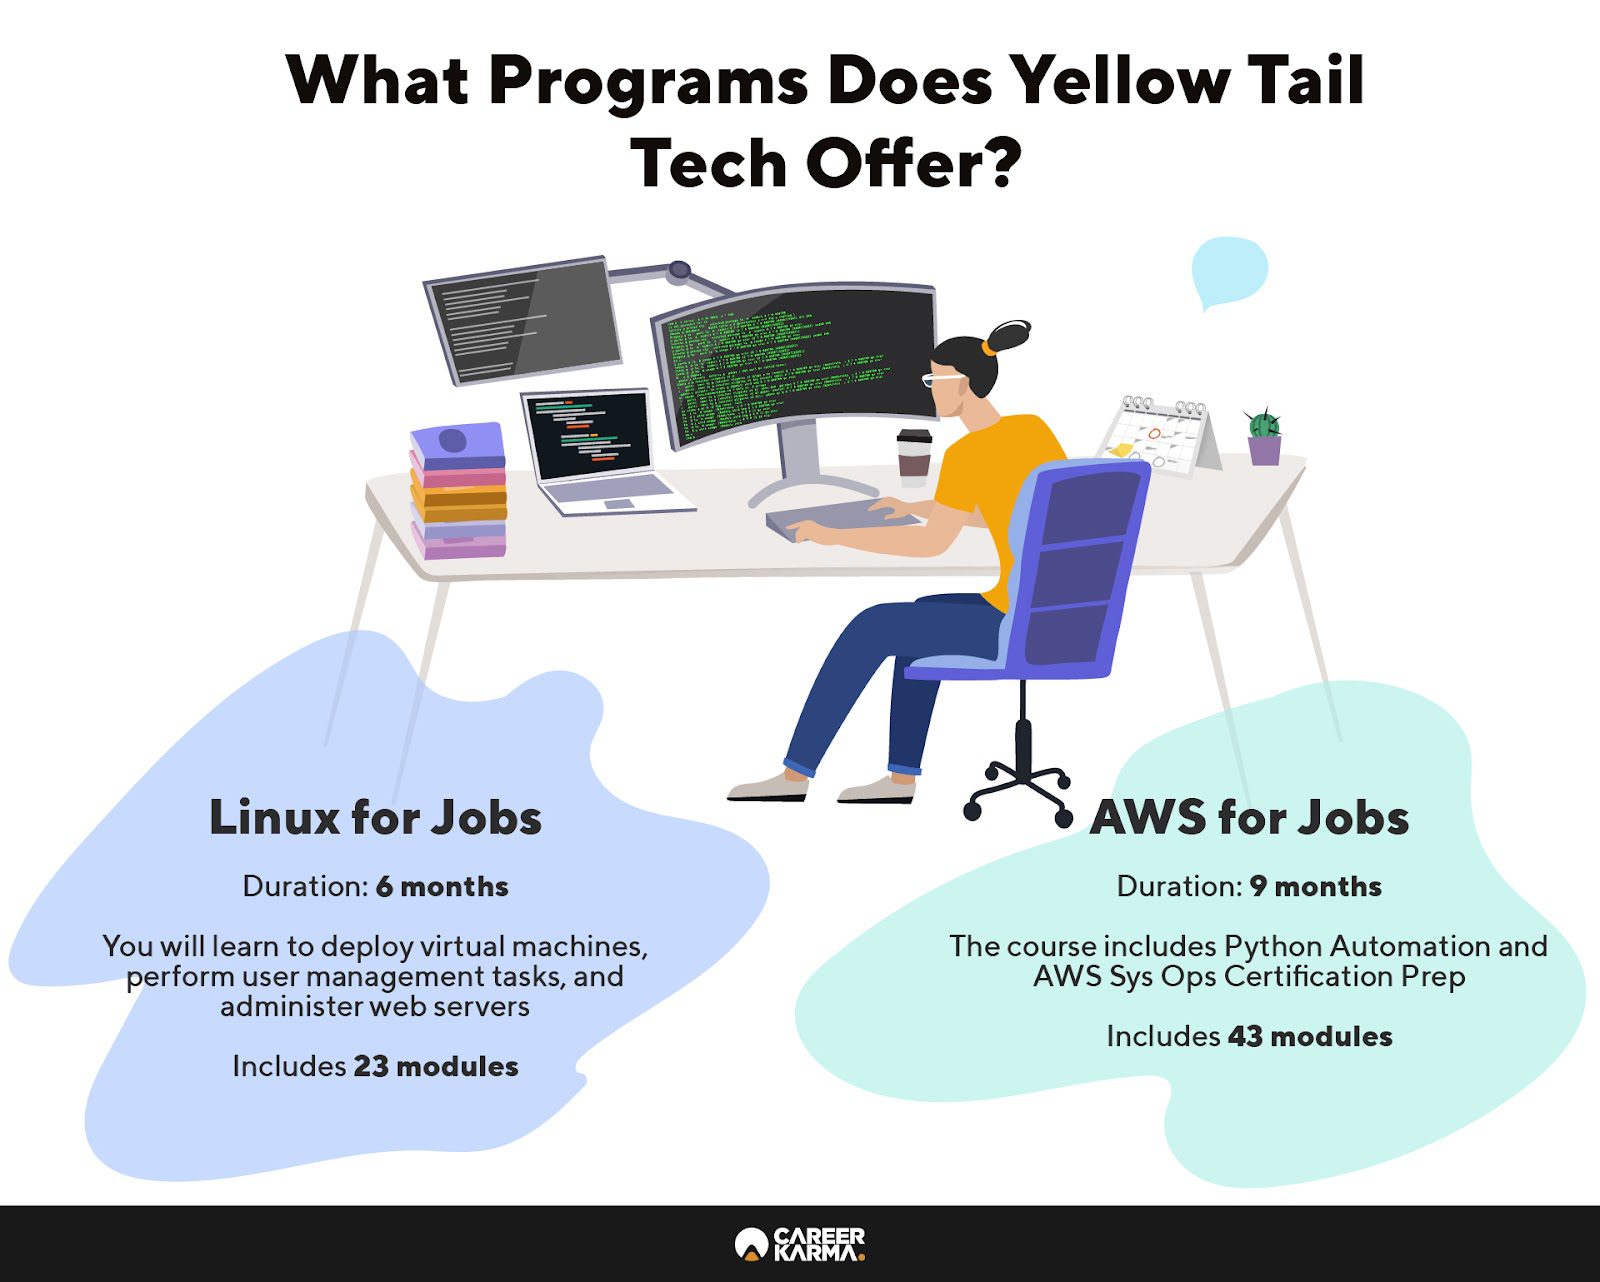 An infographic featuring Yellow Tail Tech’s programs